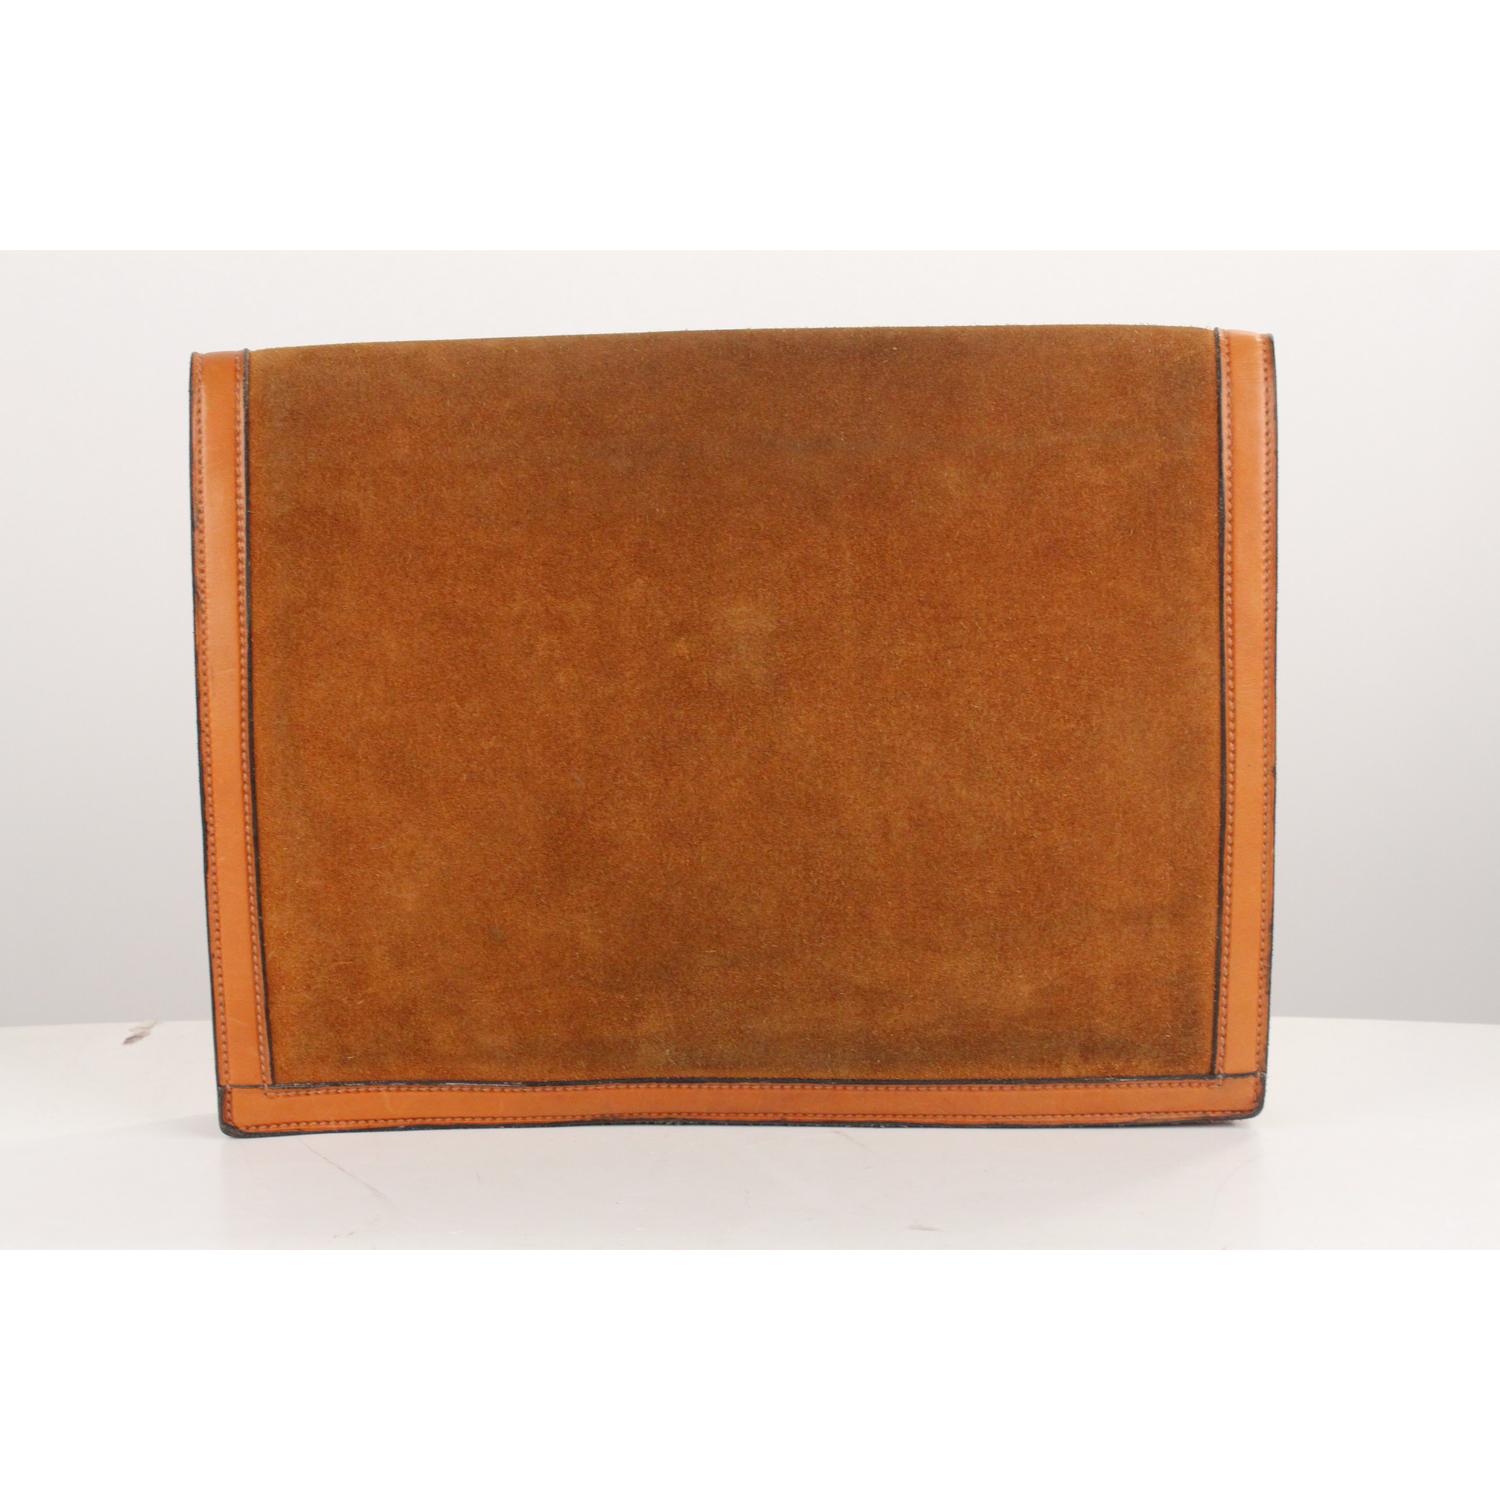 Women's Gucci Vintage Tan Suede and Leather Portfolio Document Holder